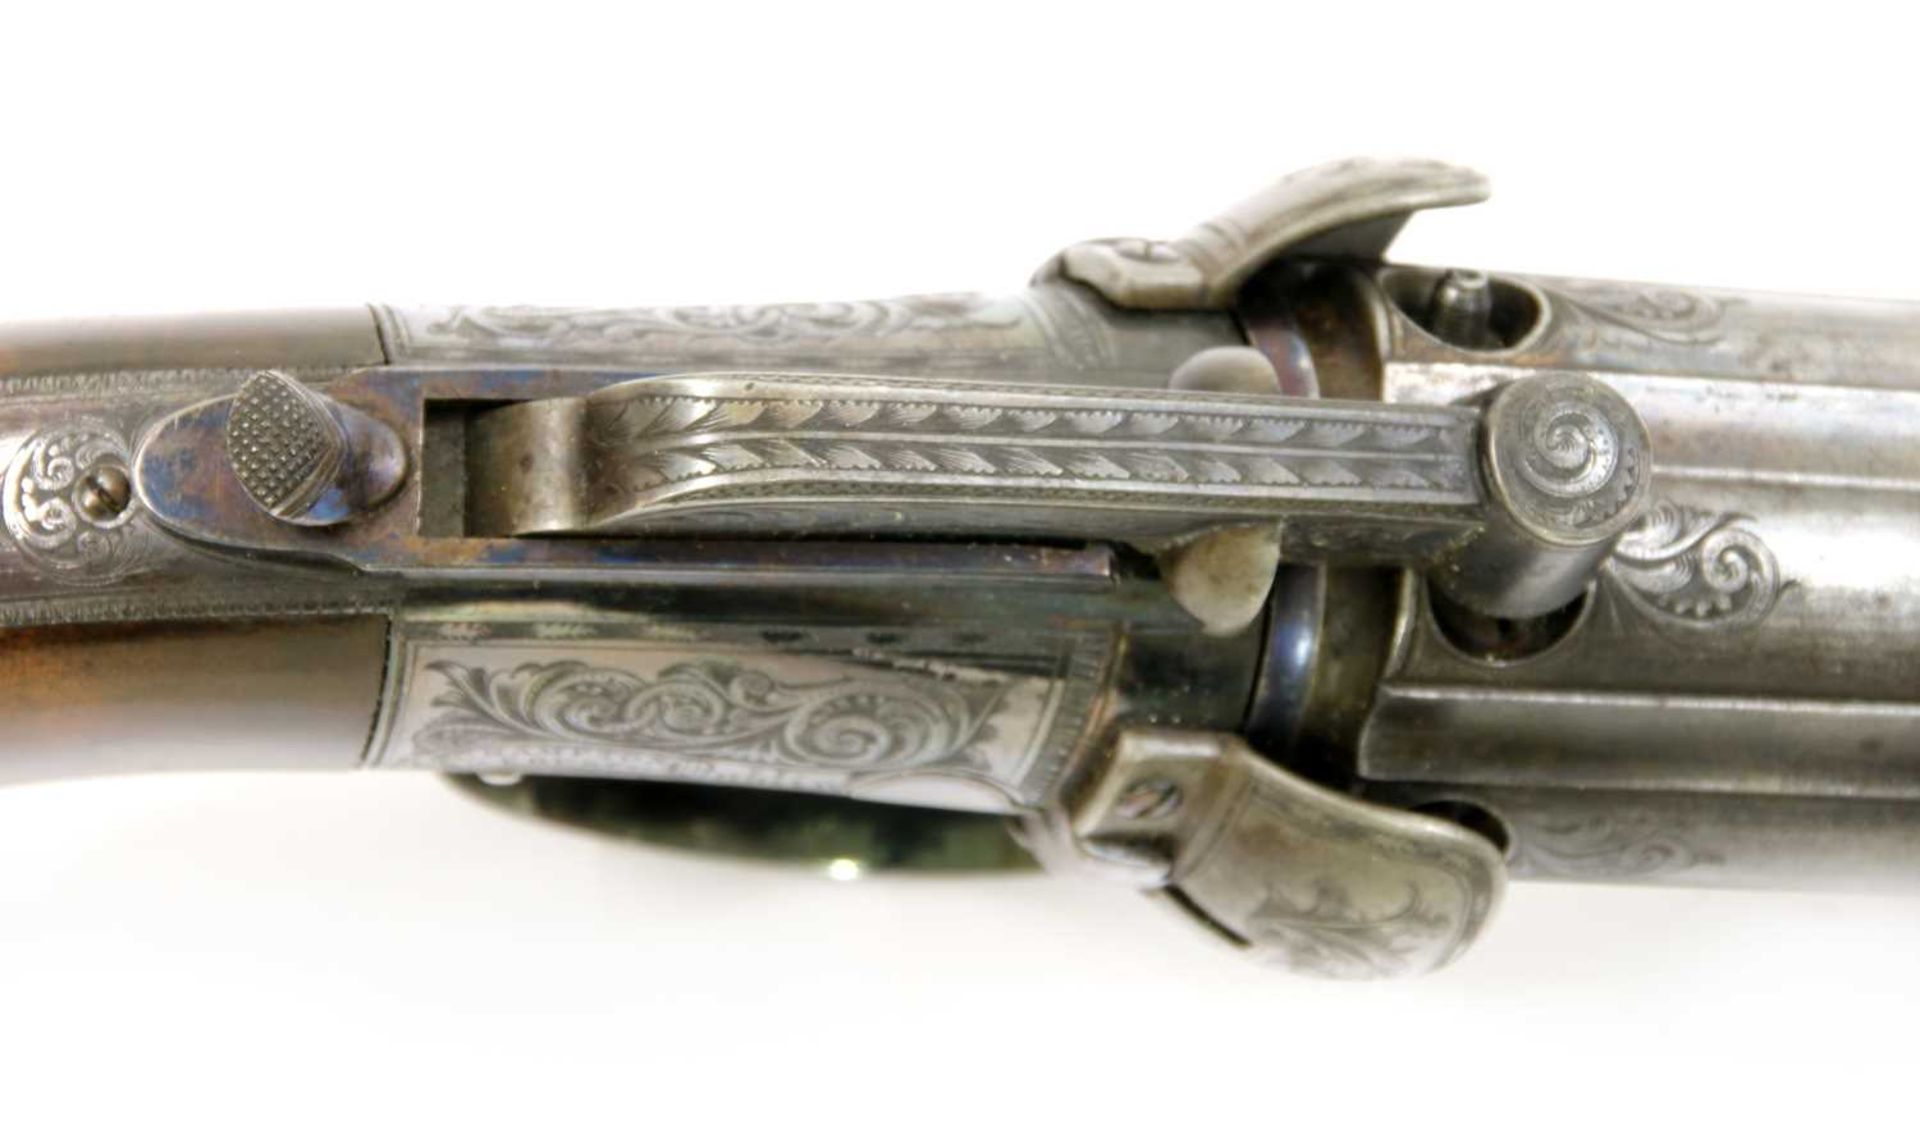 A 6-shot percussion pepperbox revolver by M & J Pattison, - Image 4 of 5